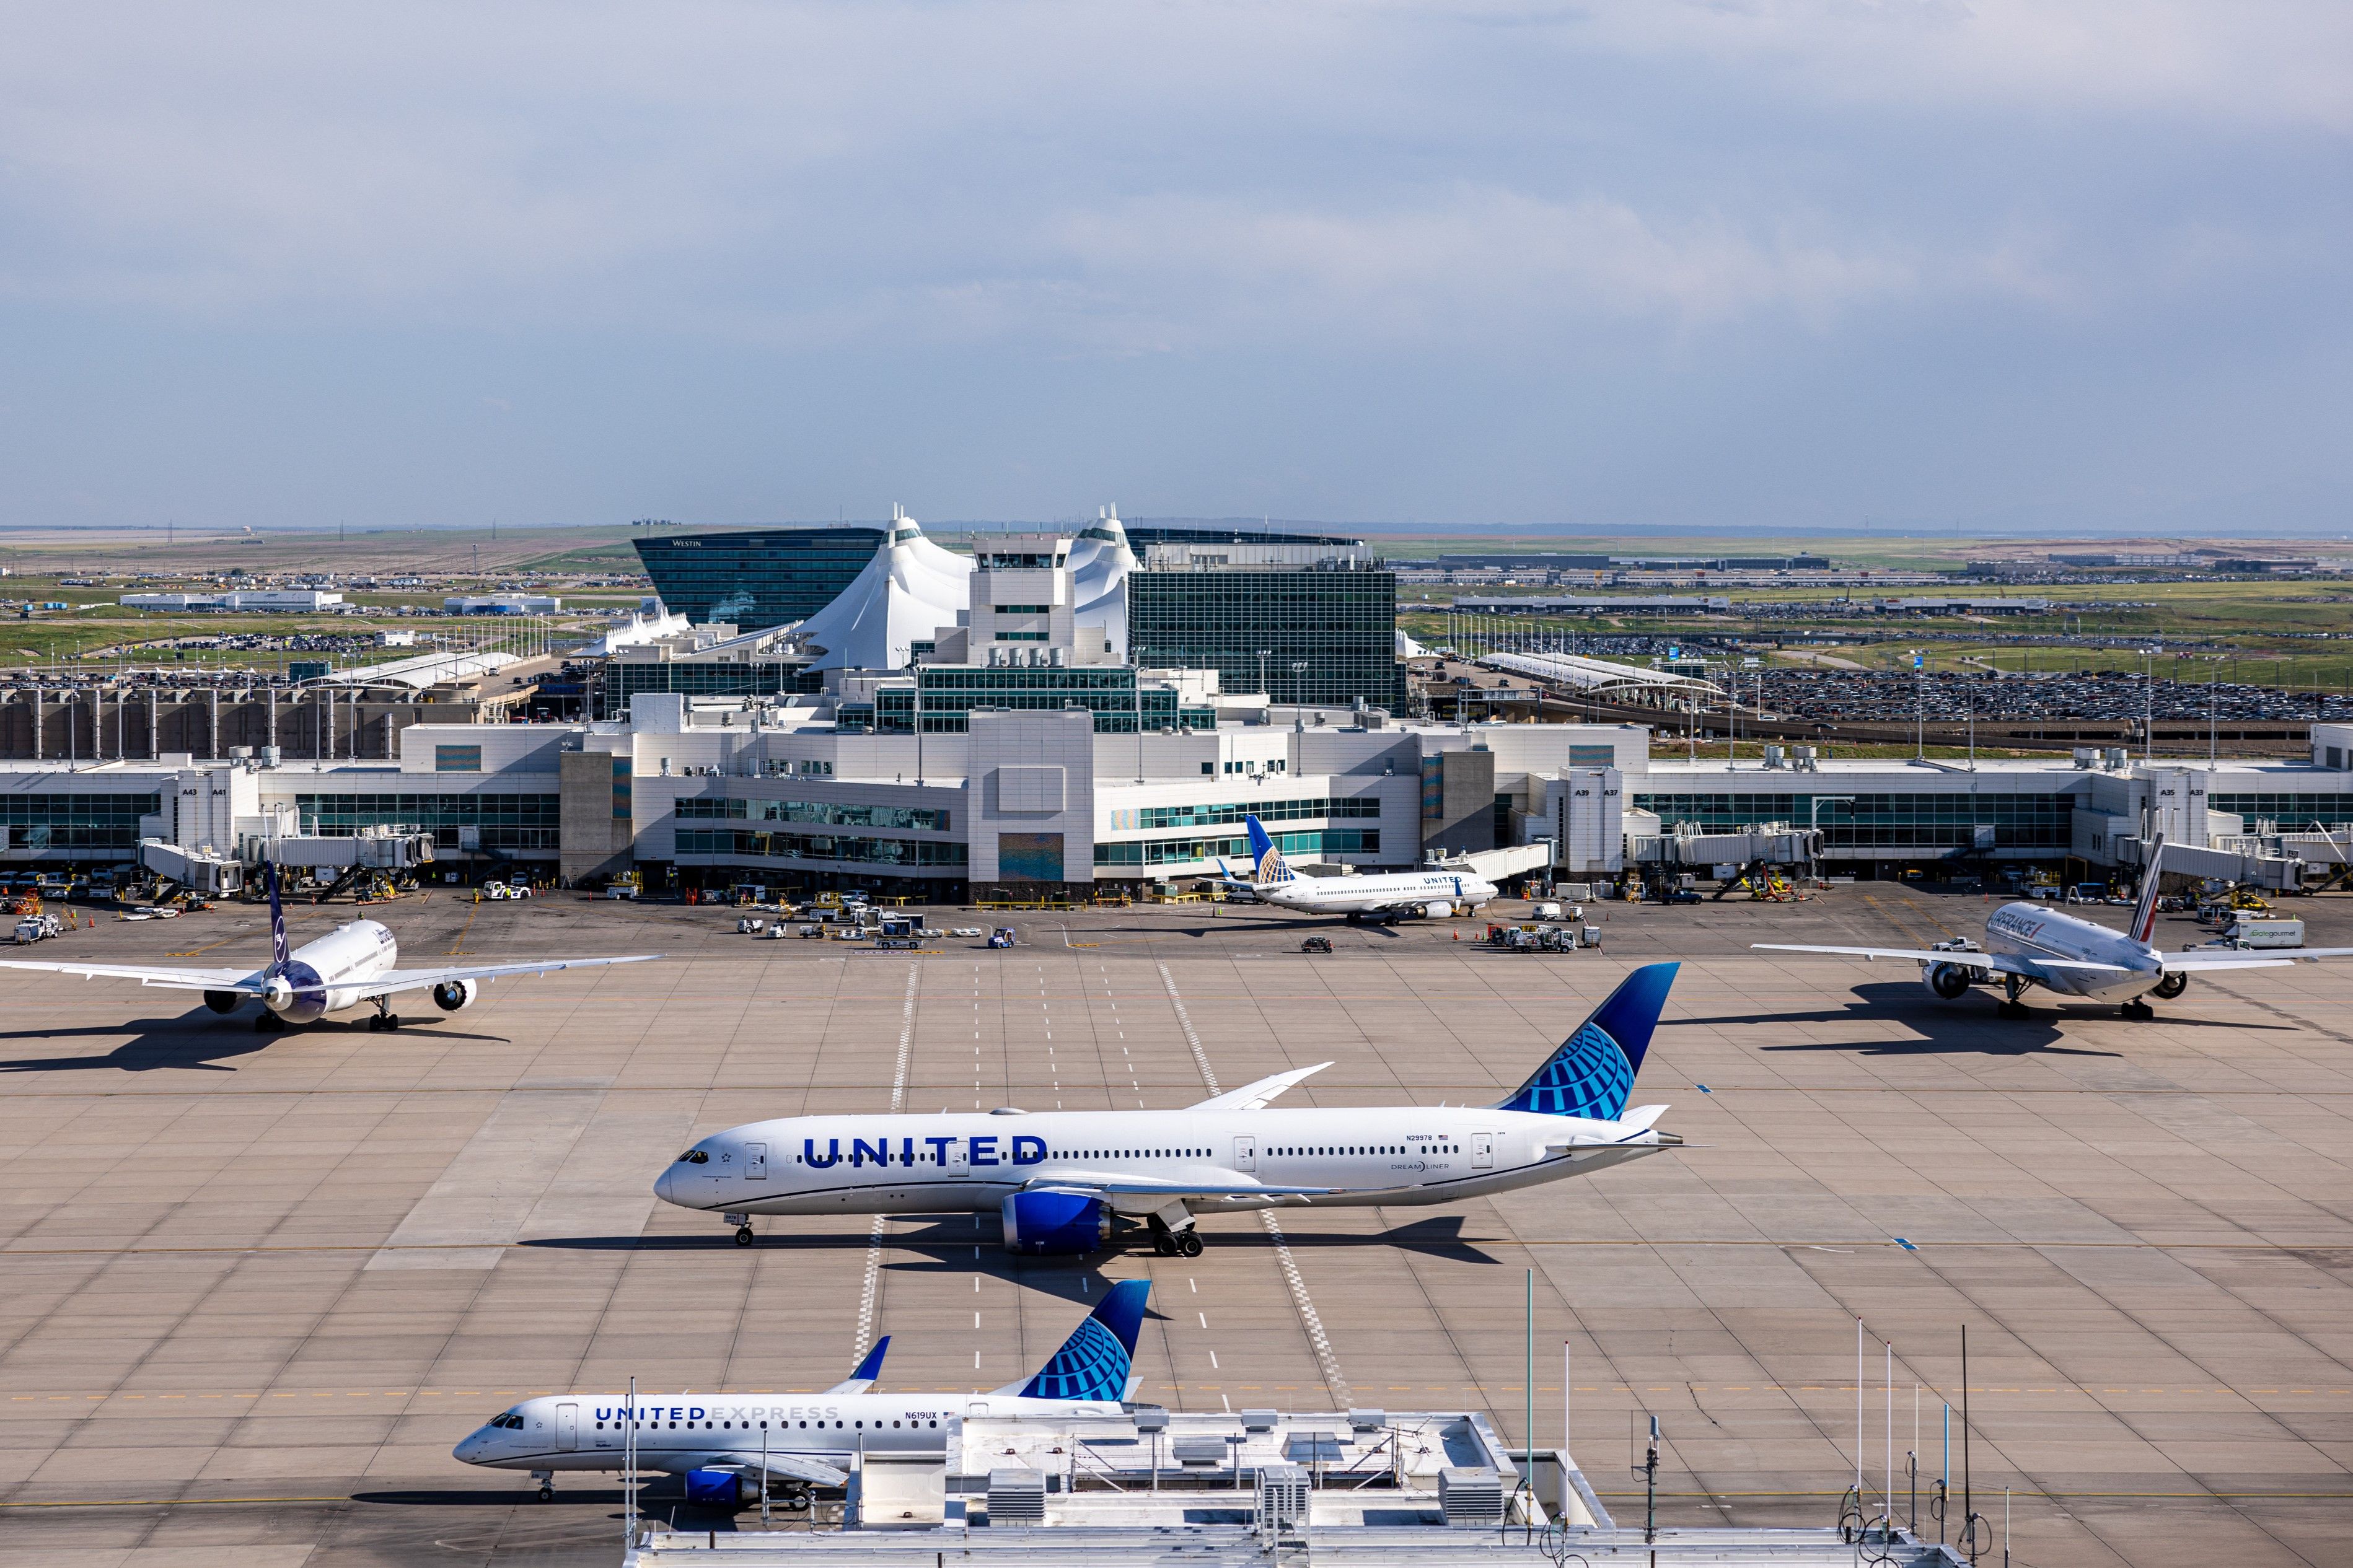 Several United Airlines Aircraft on the apron at Denver International Airport.